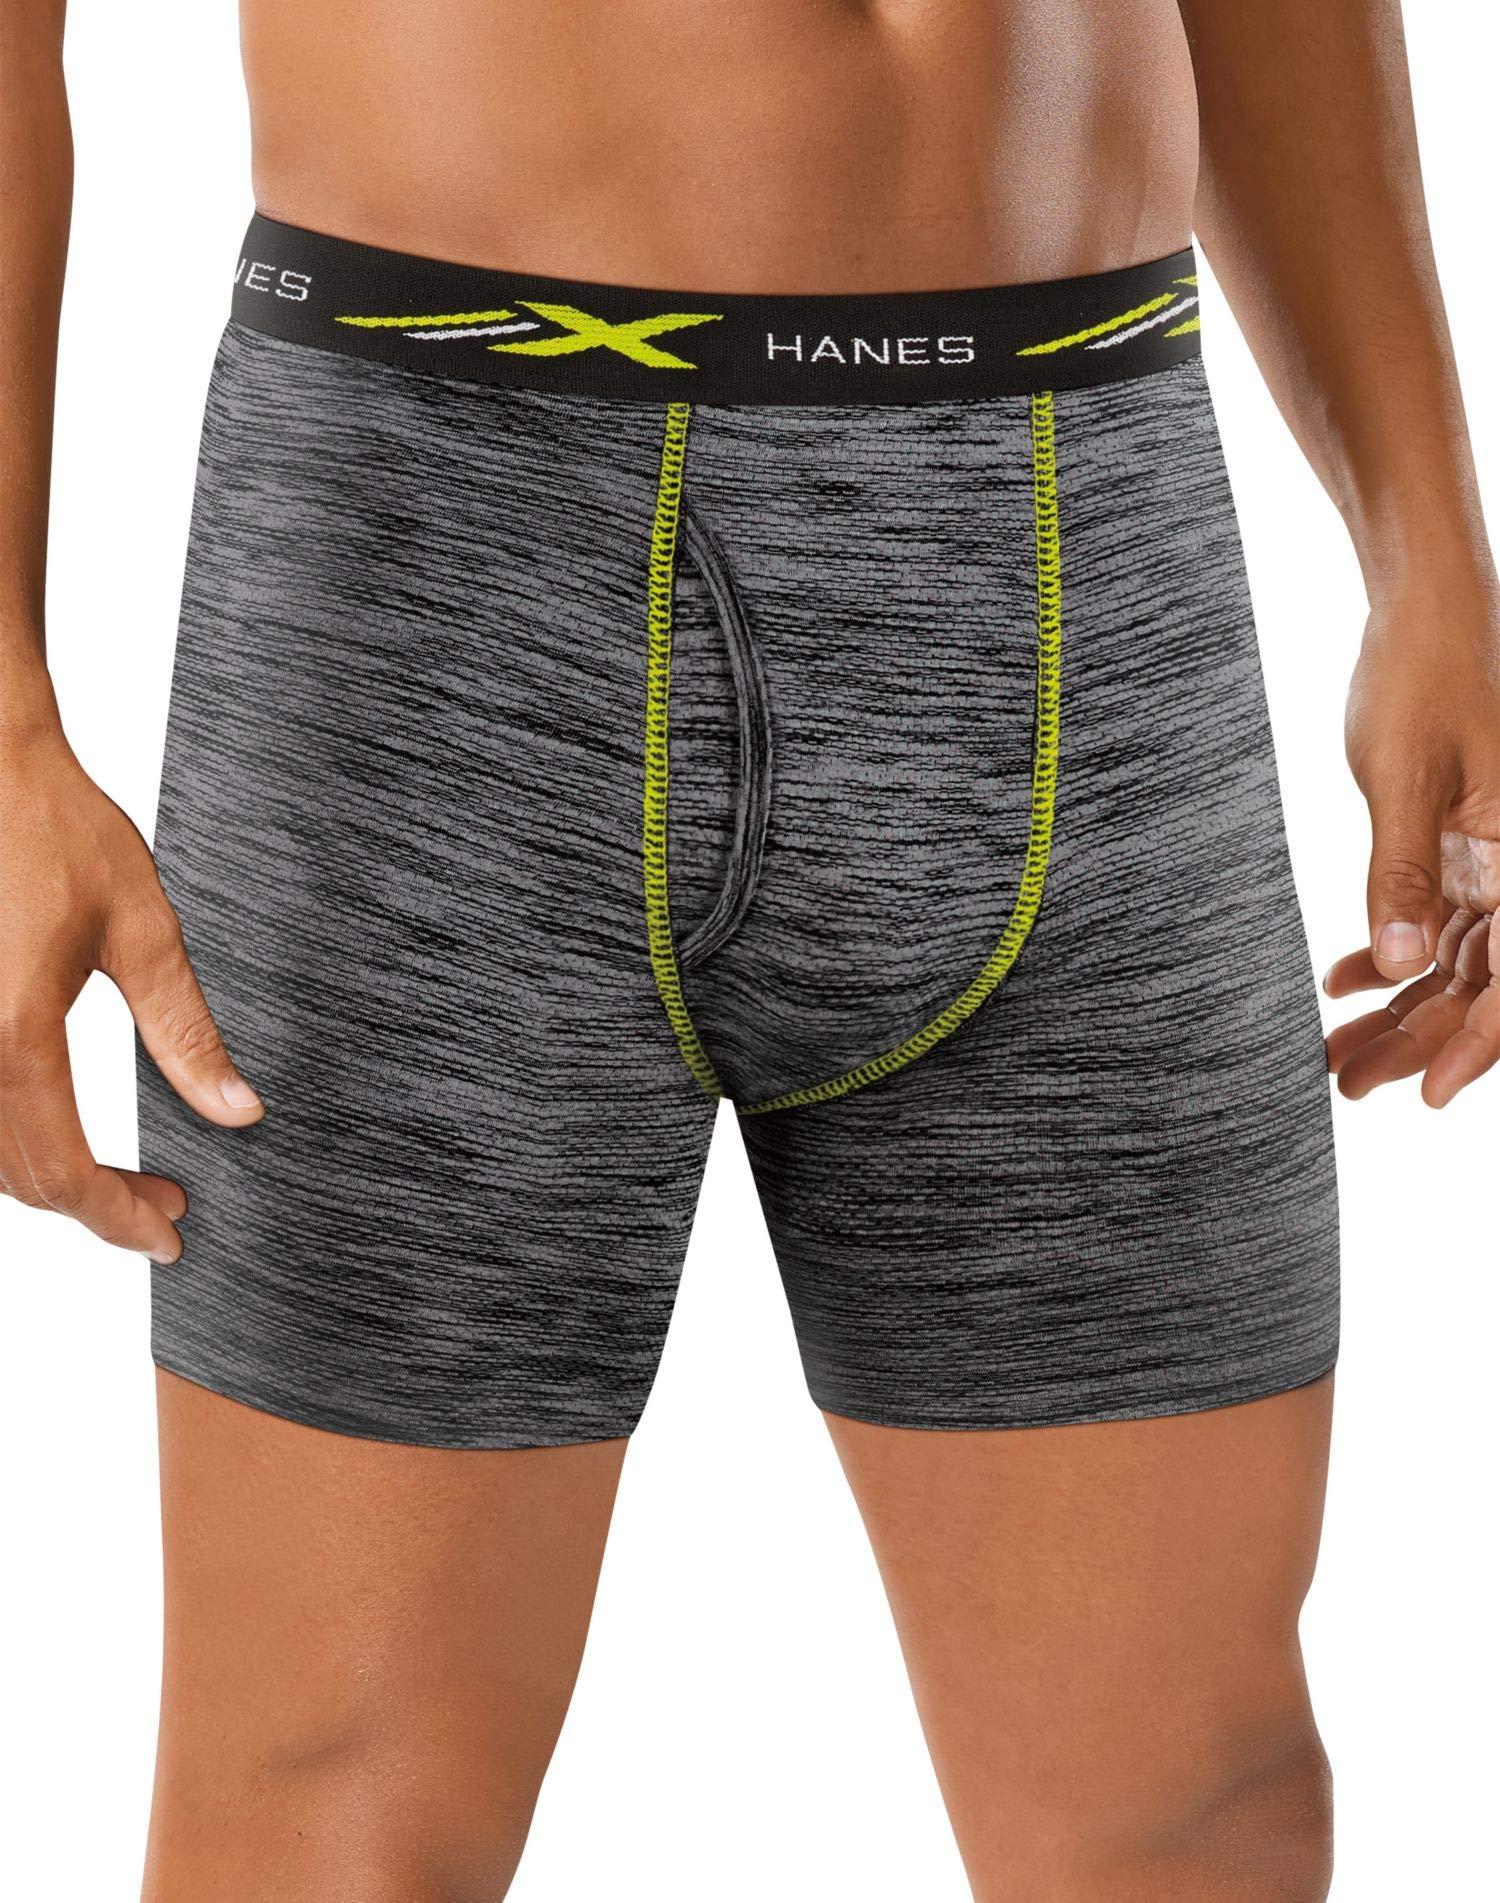 Hanes X-temp 4-way Stretch Mesh Knit Boxer 4-pack for Men